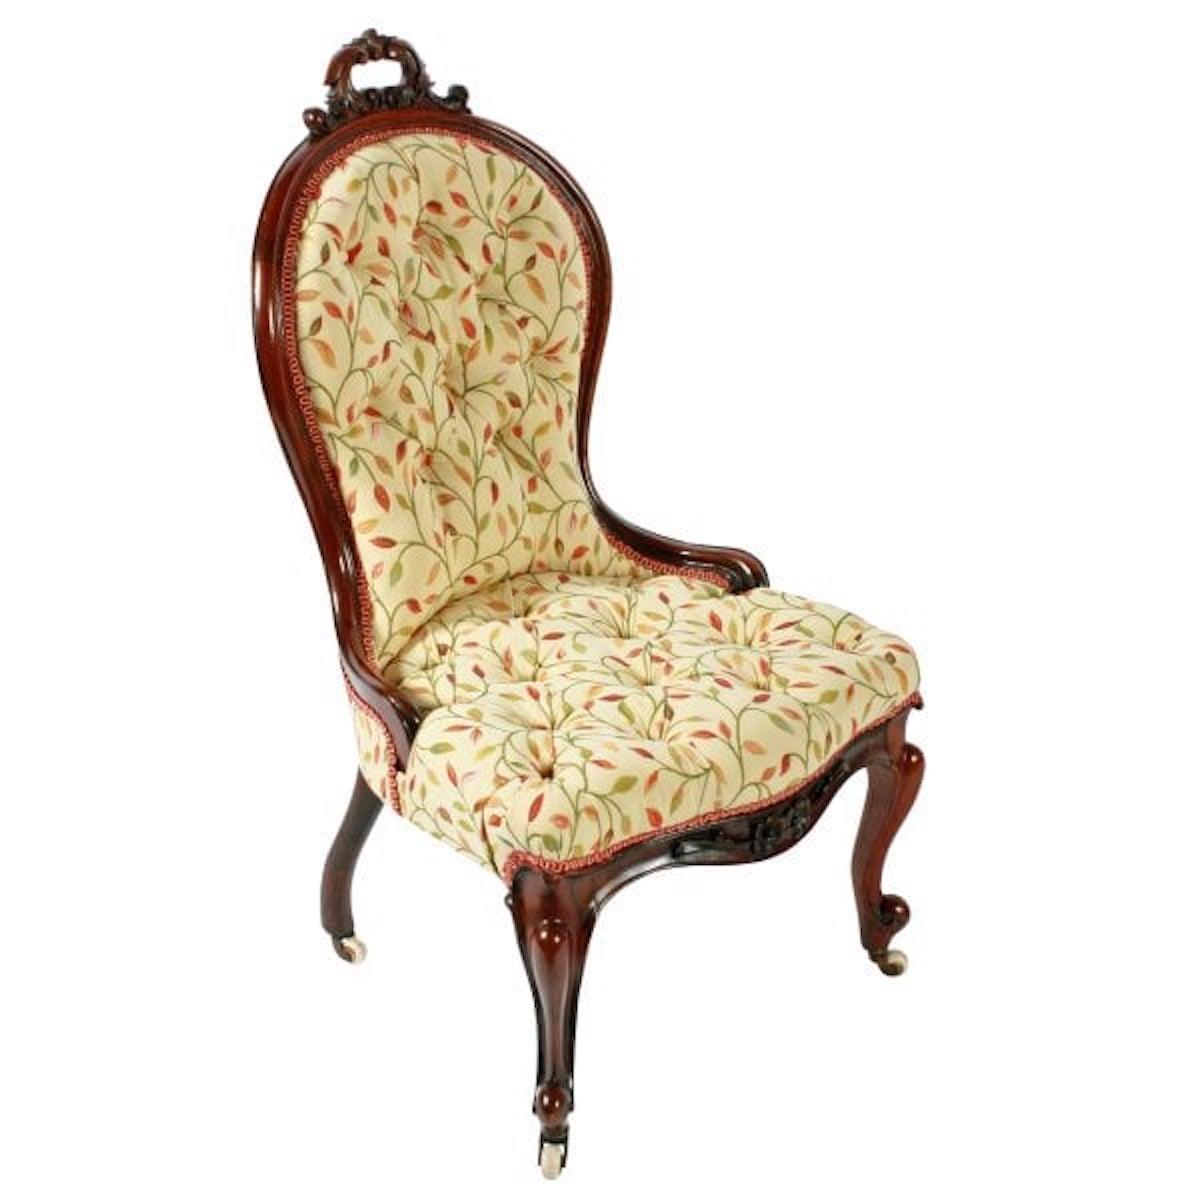 A 19th century Victorian rosewood upholstered lady's chair.

The chair has a shaped back with a scrolling acanthus carved decoration hand grip to the top.

The front legs are cabriole shaped with scroll carved detail and brass and pottery